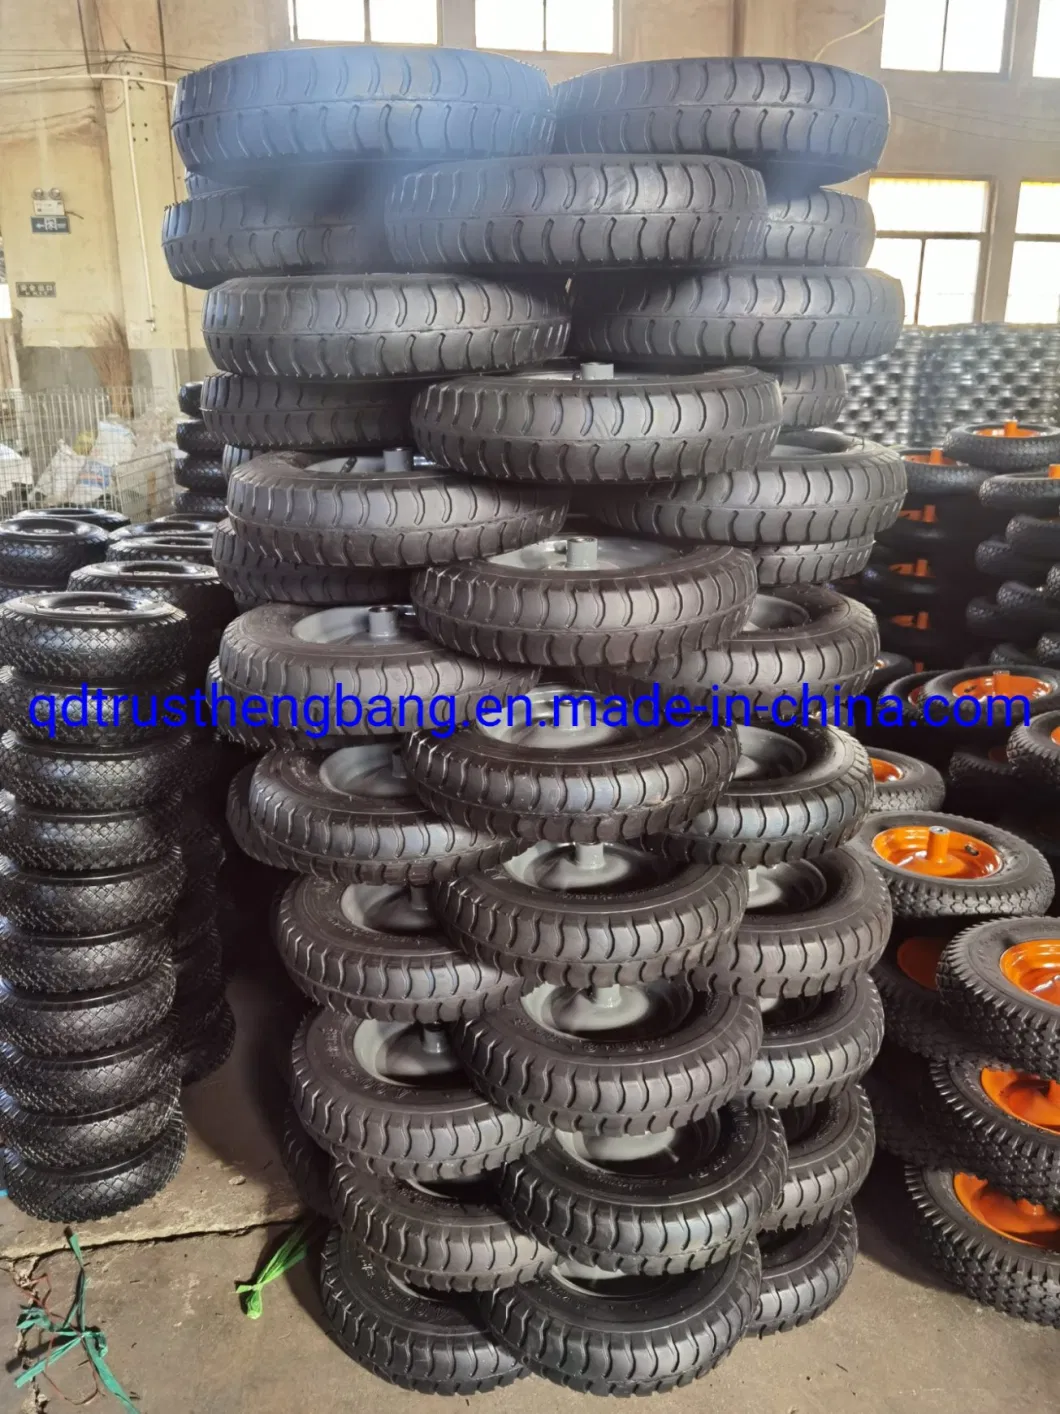 16 Inch 16X4.50-8 Pneumatic Inflatable Rubber Tire Wheel for Hand Truck Trolley Lawn Mower Spreader Trolley Stroller